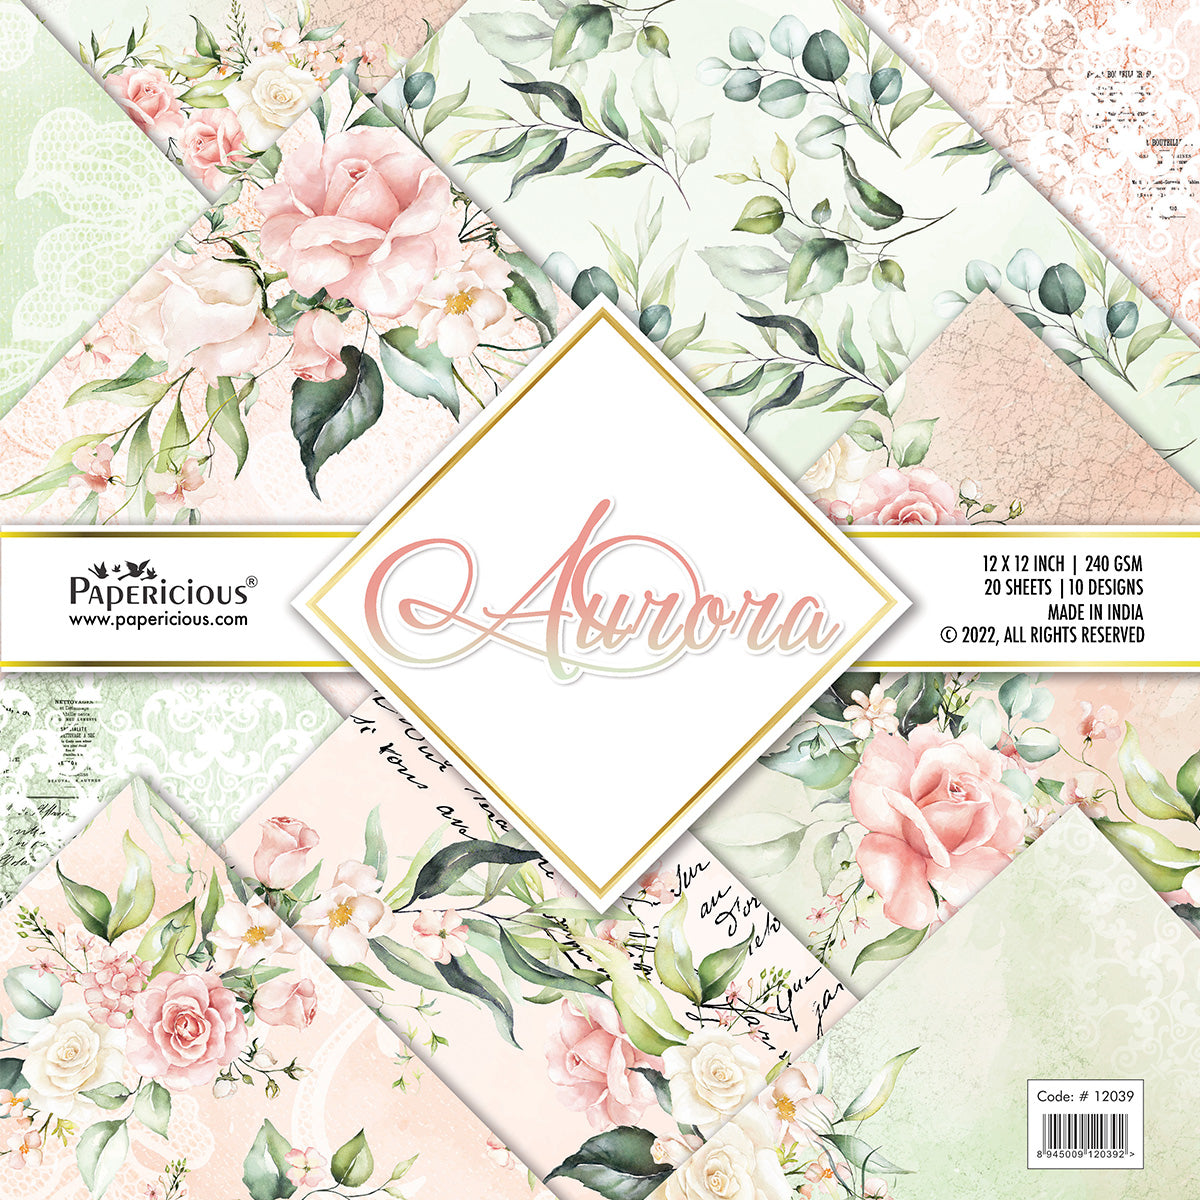 PAPERICIOUS - Aurora -  Designer Pattern Printed Scrapbook Papers 12x12 inch  / 20 sheets